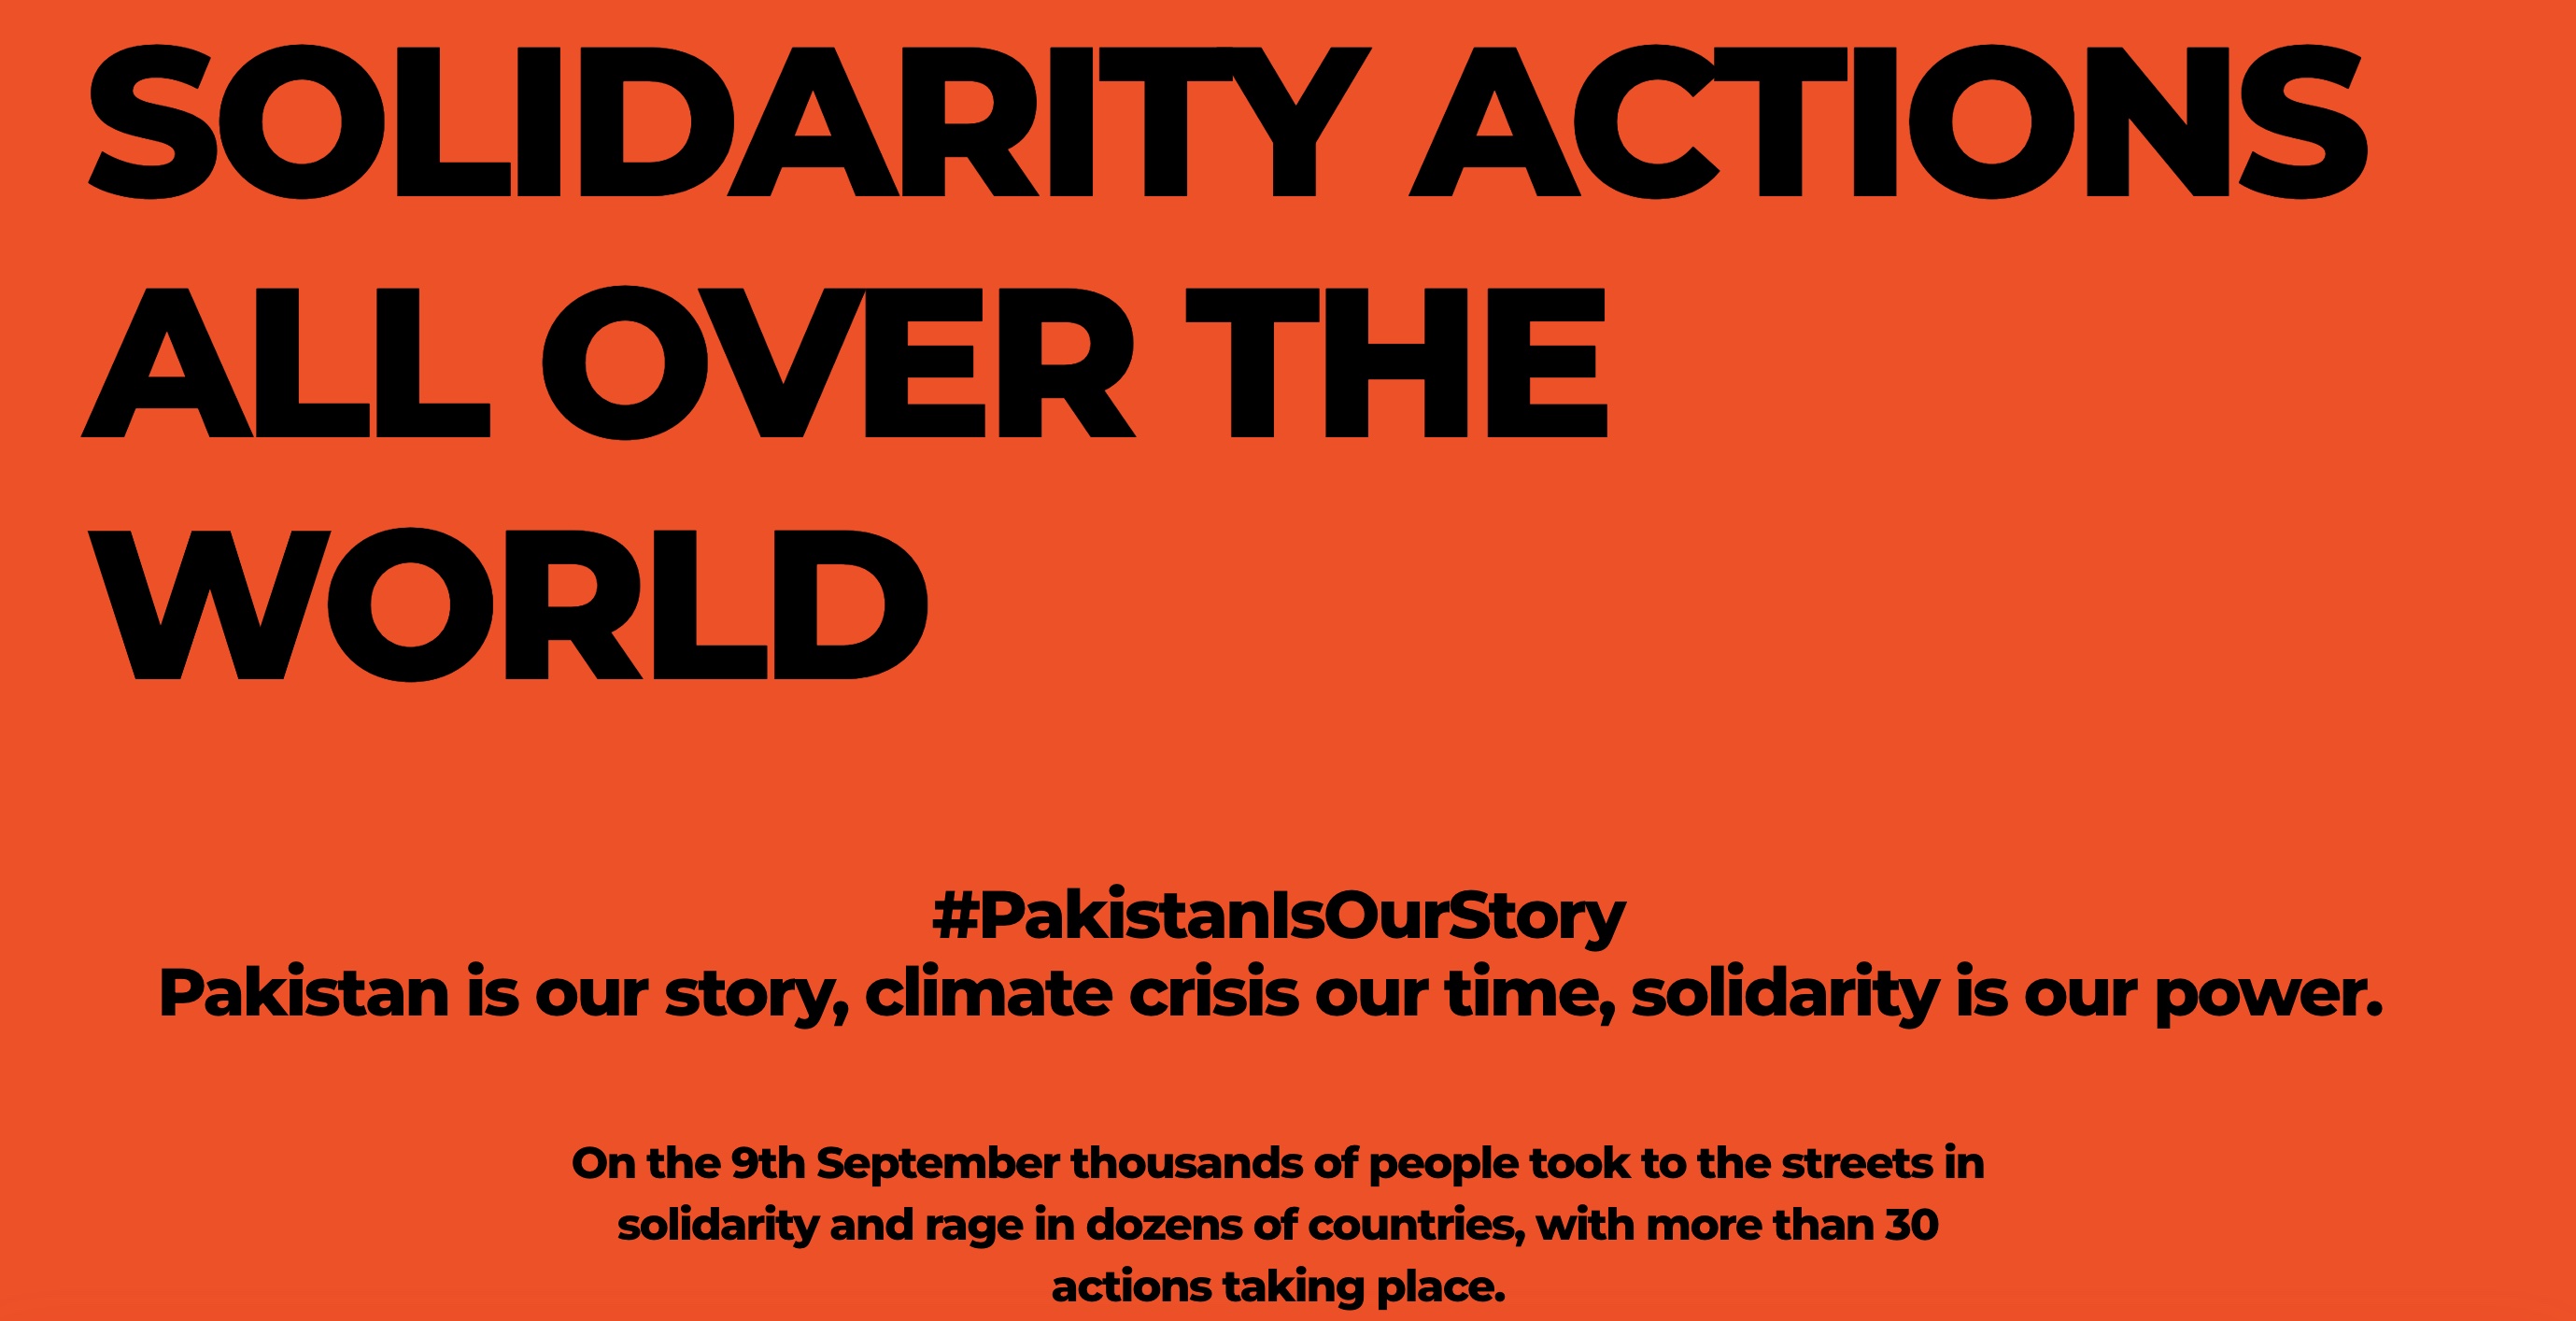 Screenshot from the #PakistanIsOurStory campaign website